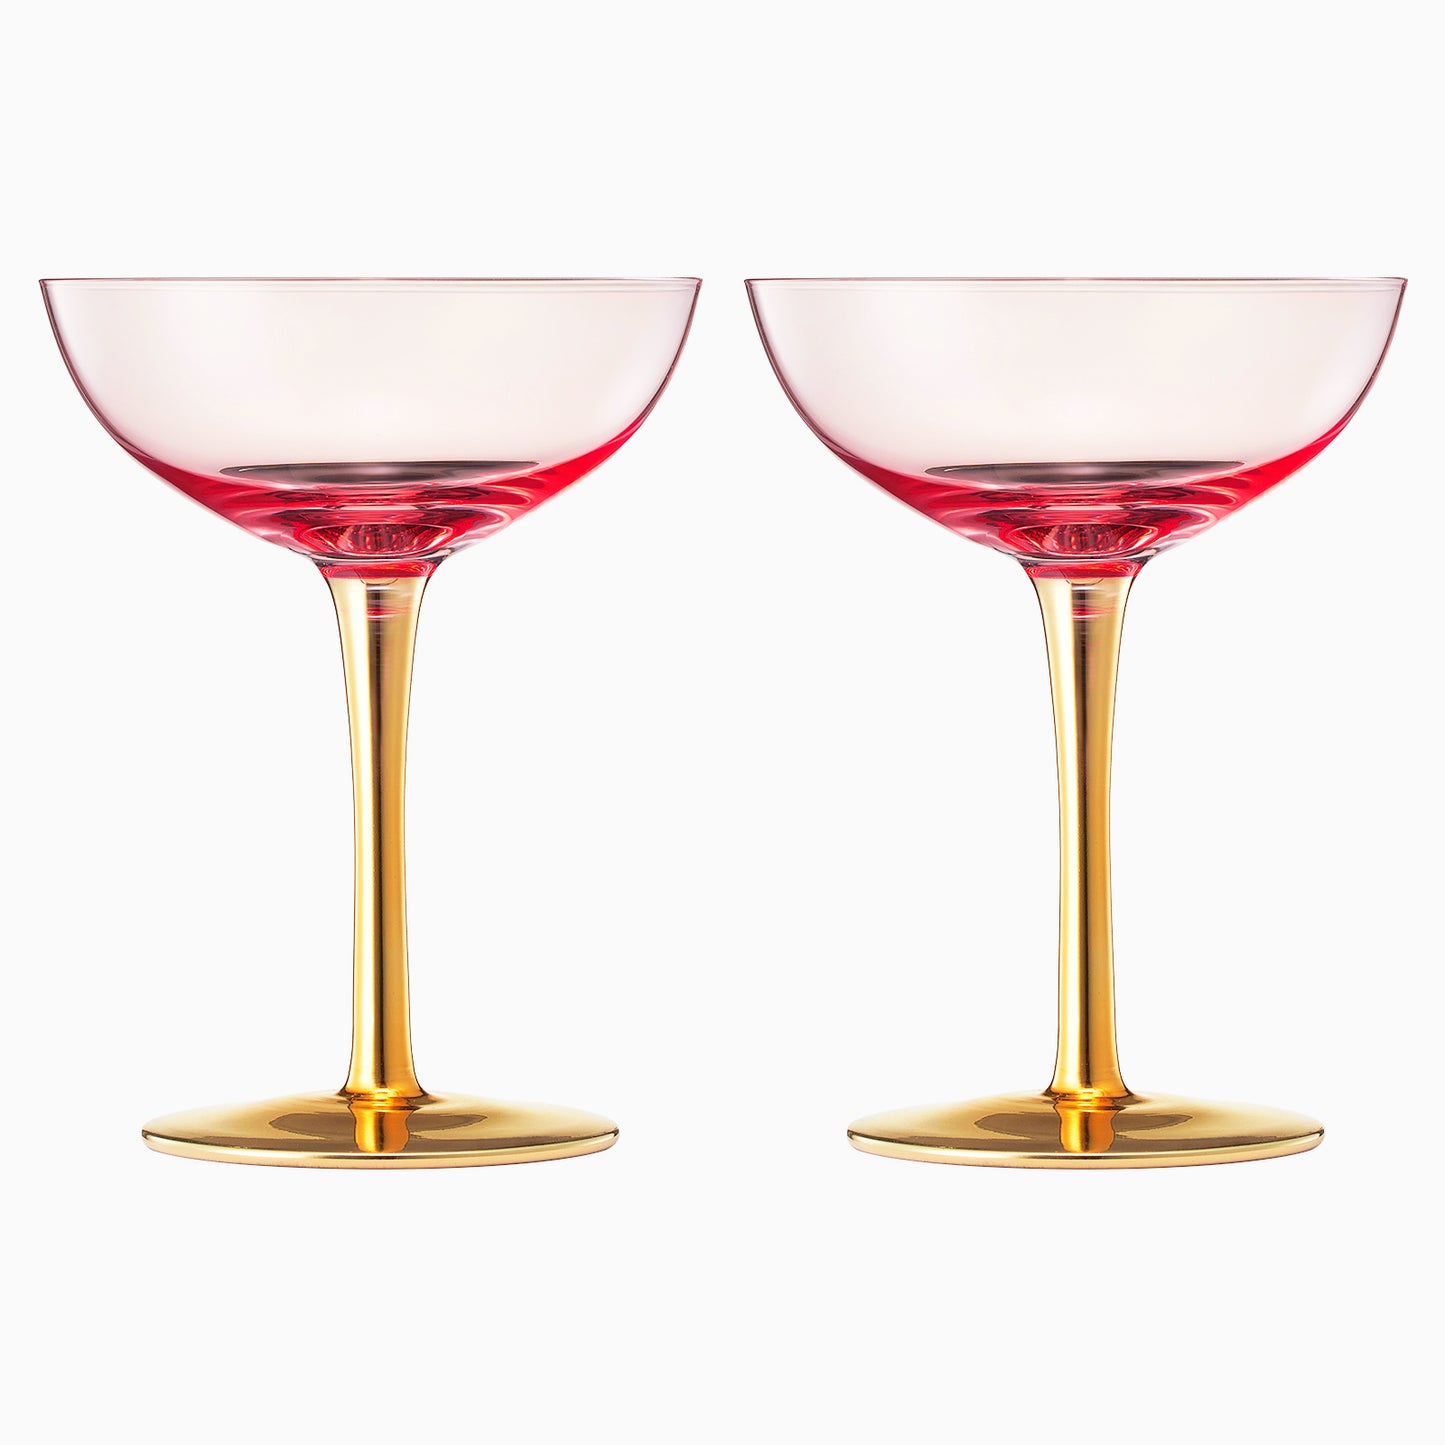 Deco Cocktail Coupe Glassware, Pink, Set of 2